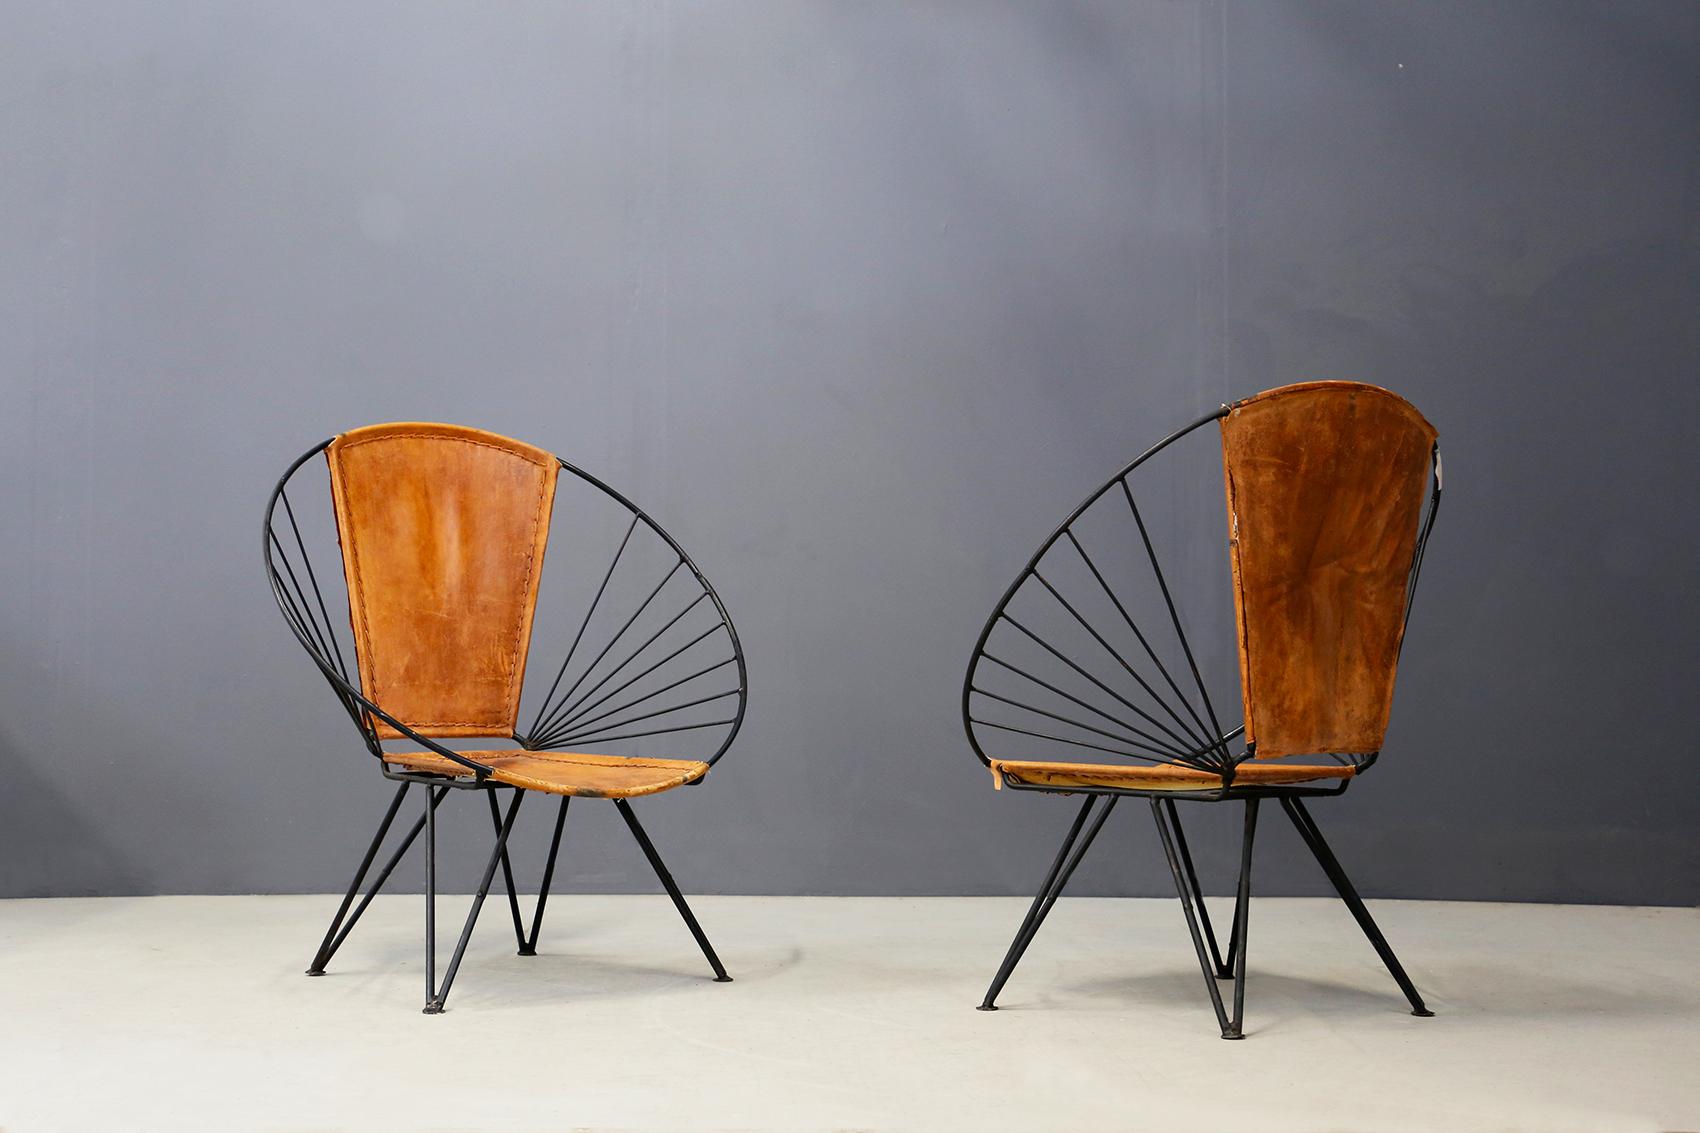 Pair of Italian manufacture oval armchairs in iron and leather, 1960s. The armchairs are made of a tubular iron frame. The seat and backrest are upholstered in a beautiful cognac-colored leather. The structure of the chairs is oval, almost